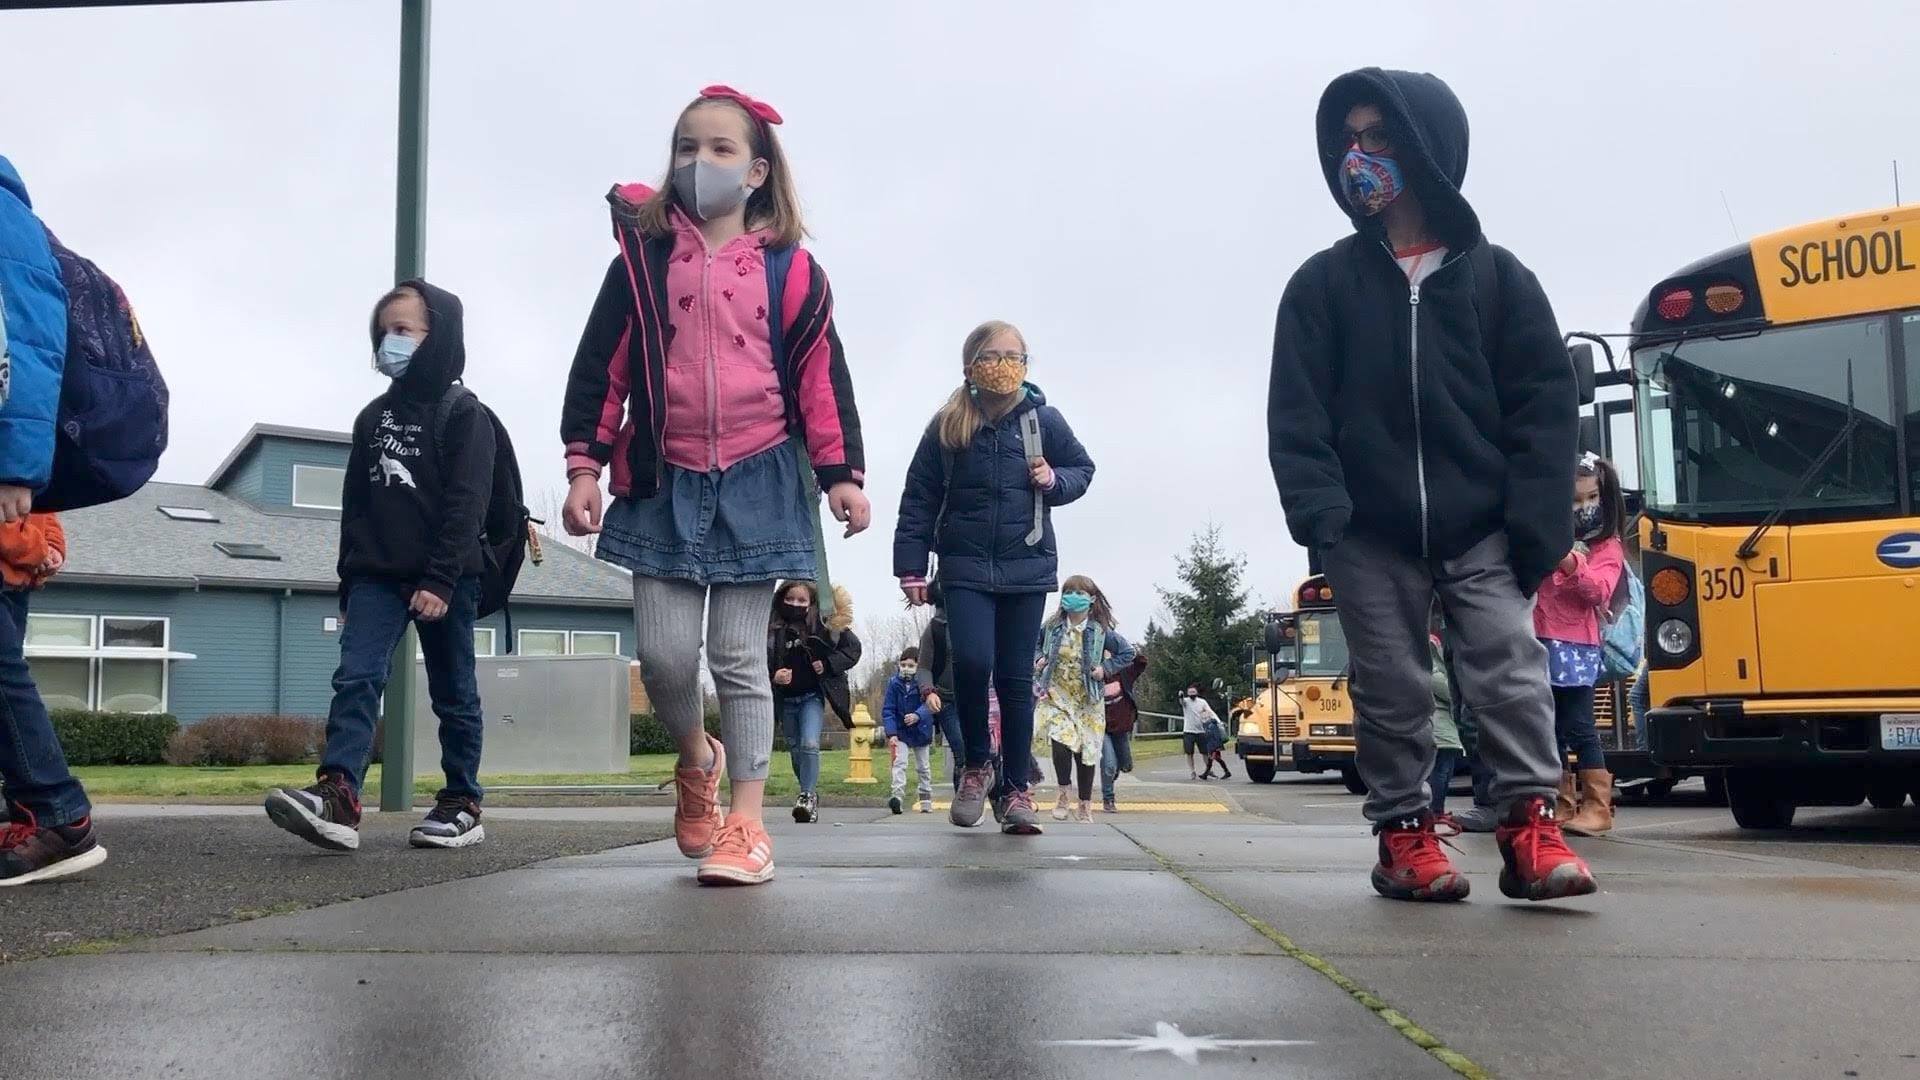 Elementary students walking away from a bus, wearing COVID-19 masks.